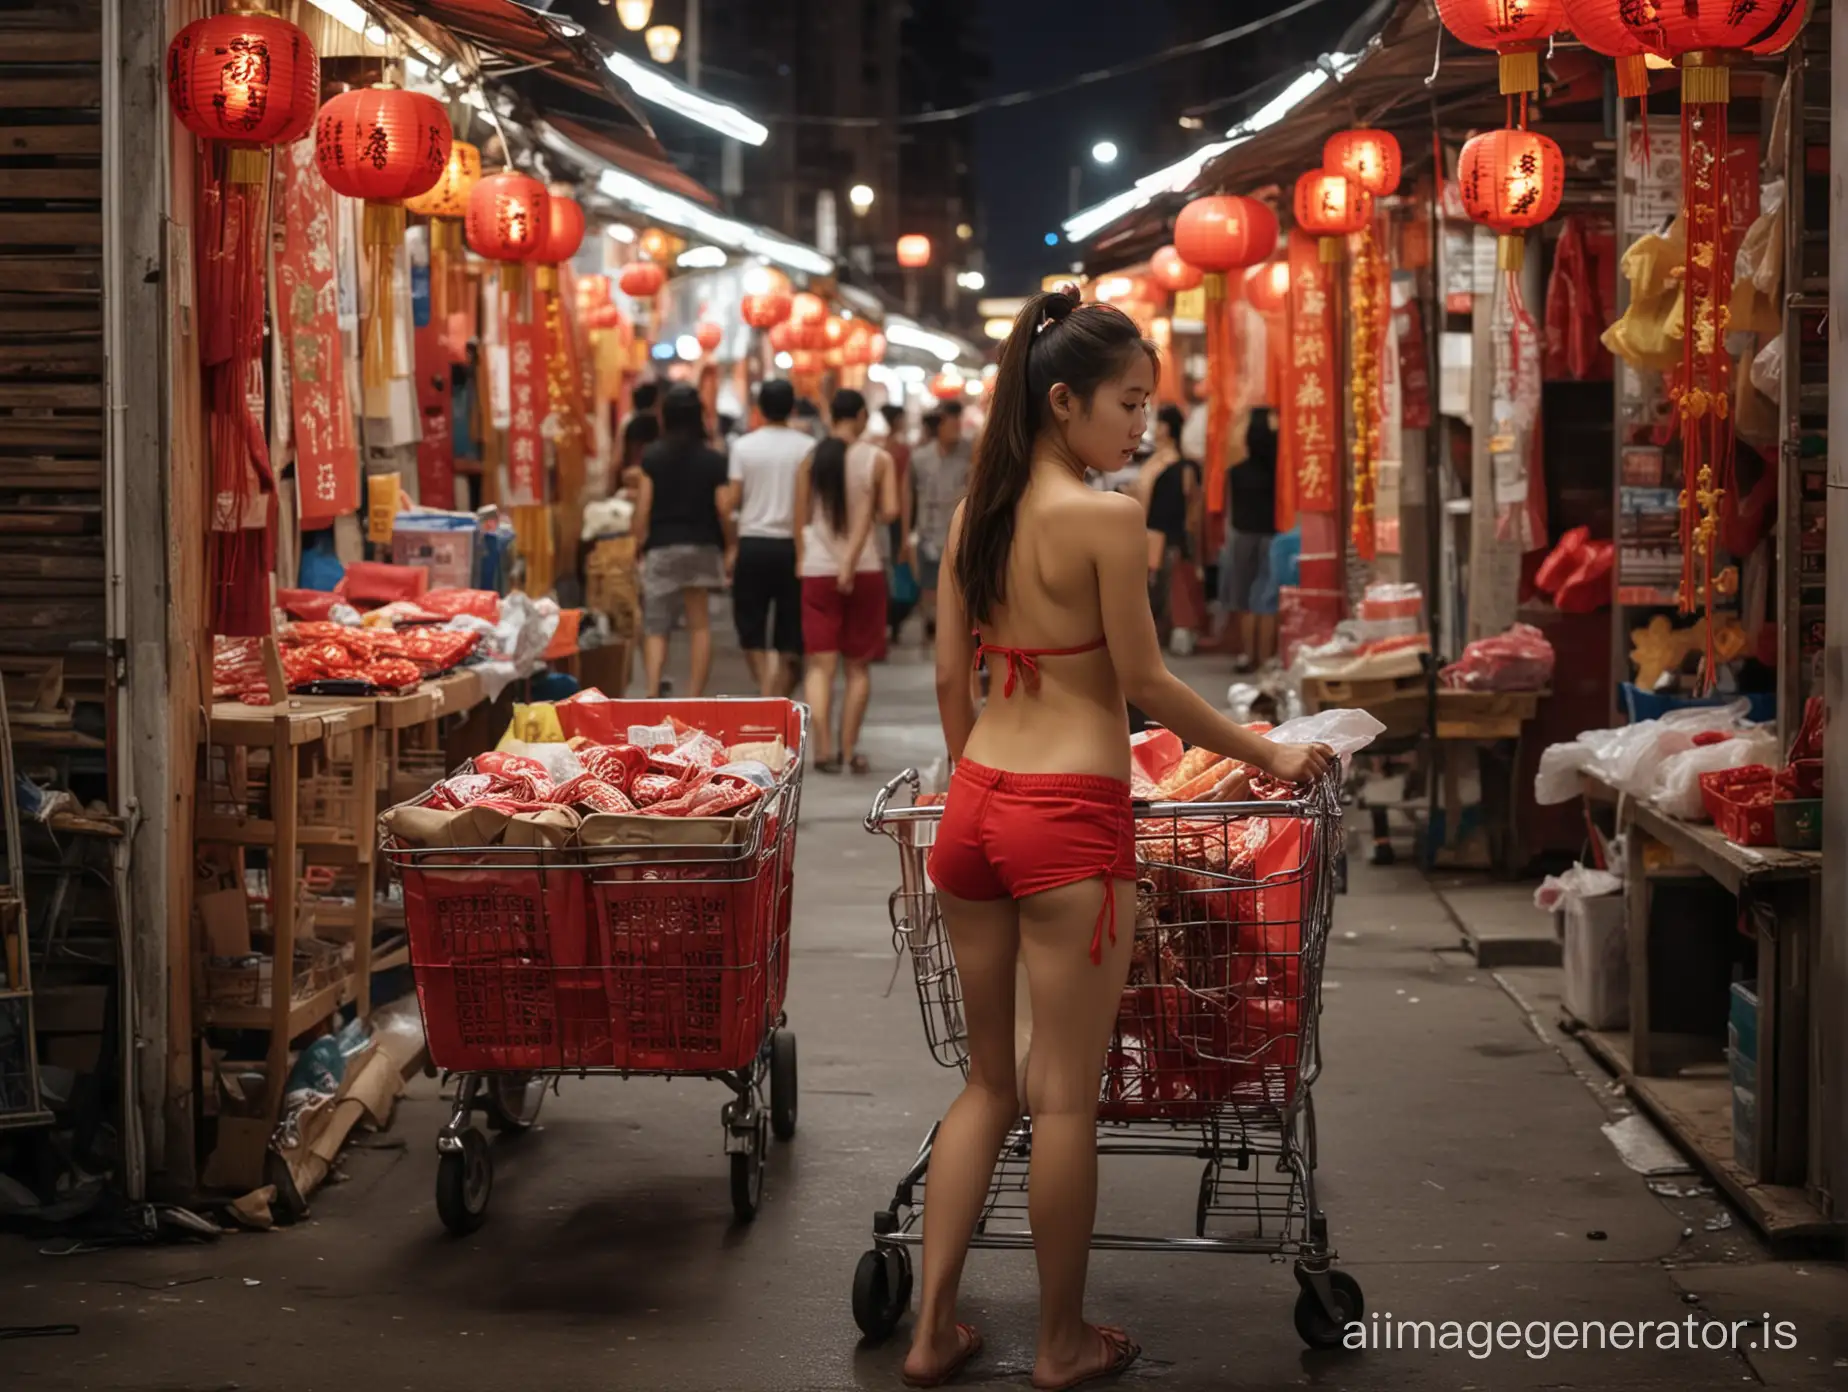 A super high resolution, best quality photojournalistic photo depicting: As the humid air clings to her skin, the young girl sets up her push cart store in the midst of a bustling night market street. With only a pair of worn red running shorts covering her slender frame, her long dark brown hair is styled into elaborate ponytails and buns. The sweat glistens on her smooth, fair skin as she arranges her handmade Chinese New Year decor on display. Despite the heat and the crowds, she works tirelessly, determined to make a living for herself. Passersby stop to admire her craftsmanship and purchase her creations, impressed by her entrepreneurial spirit at such a young age. As the night wears on, the bright white lights of the street illuminate her hard work and determination, making her stand out among the sea of vendors. This topless 13 year old girl is a symbol of resilience and determination, showcasing the true spirit of Chinese New Year in the midst of the chaotic and vibrant night market.